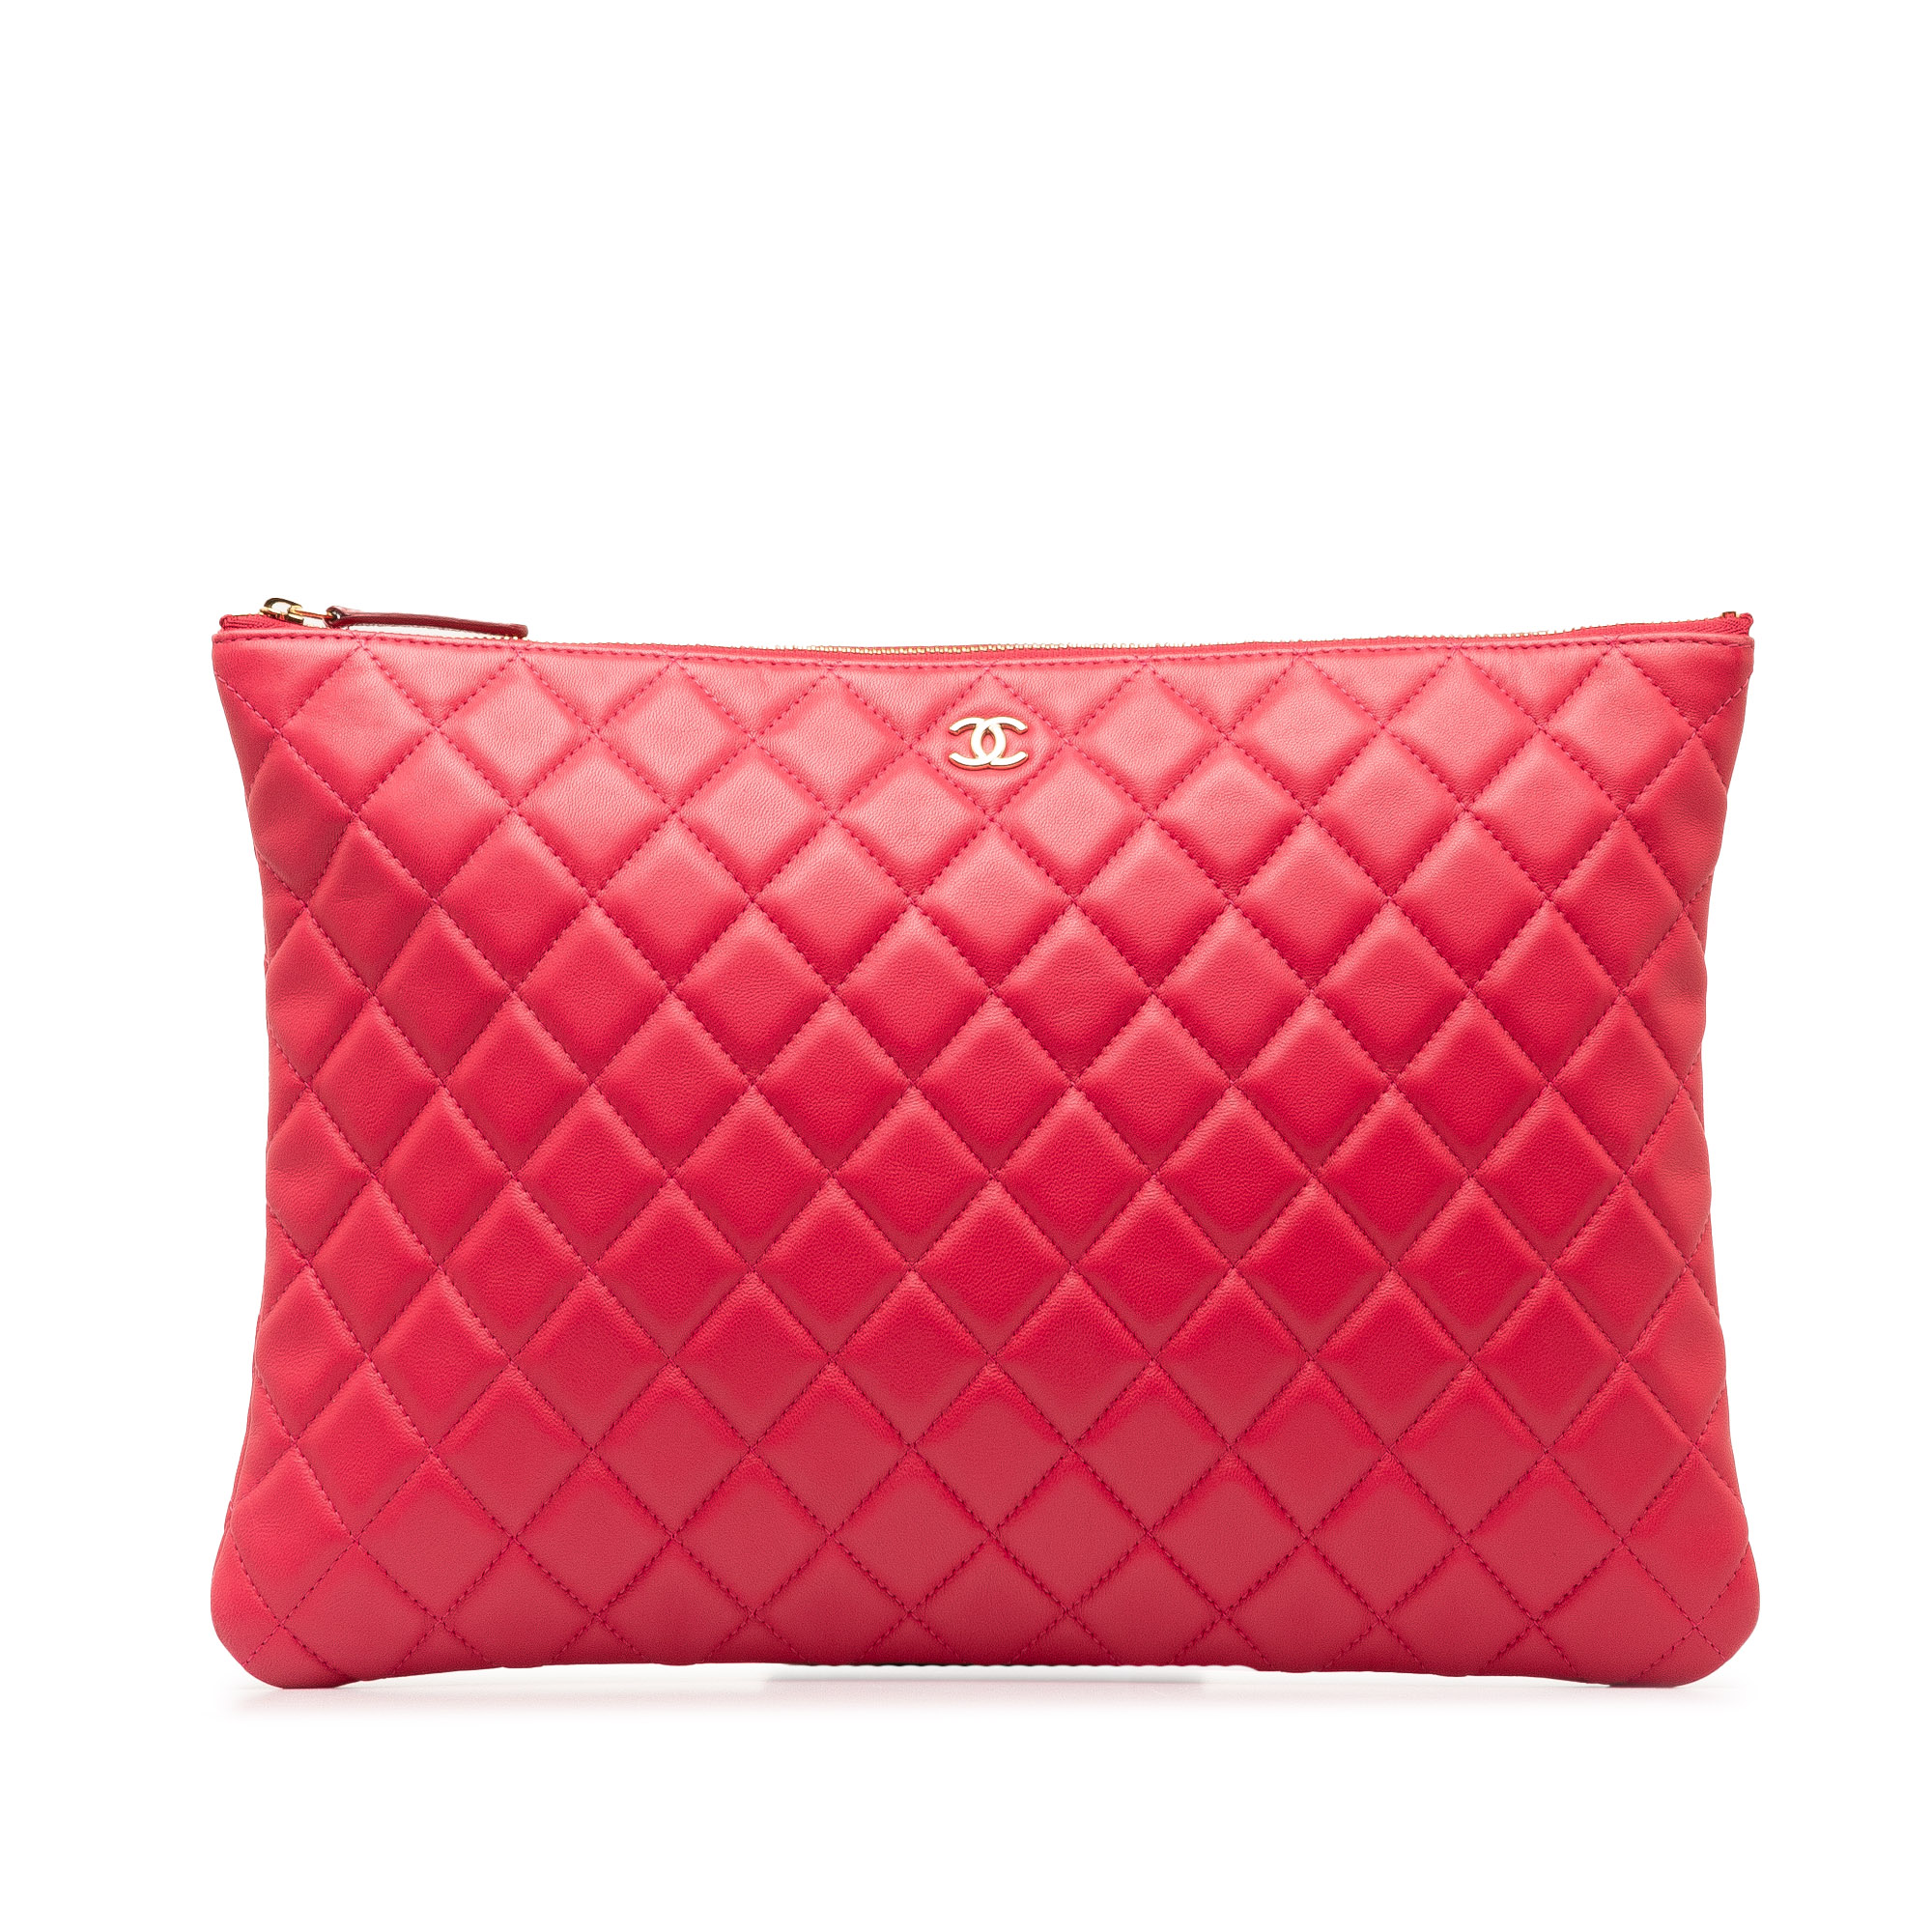 Luxury Quilted Leather Zipper Clutch